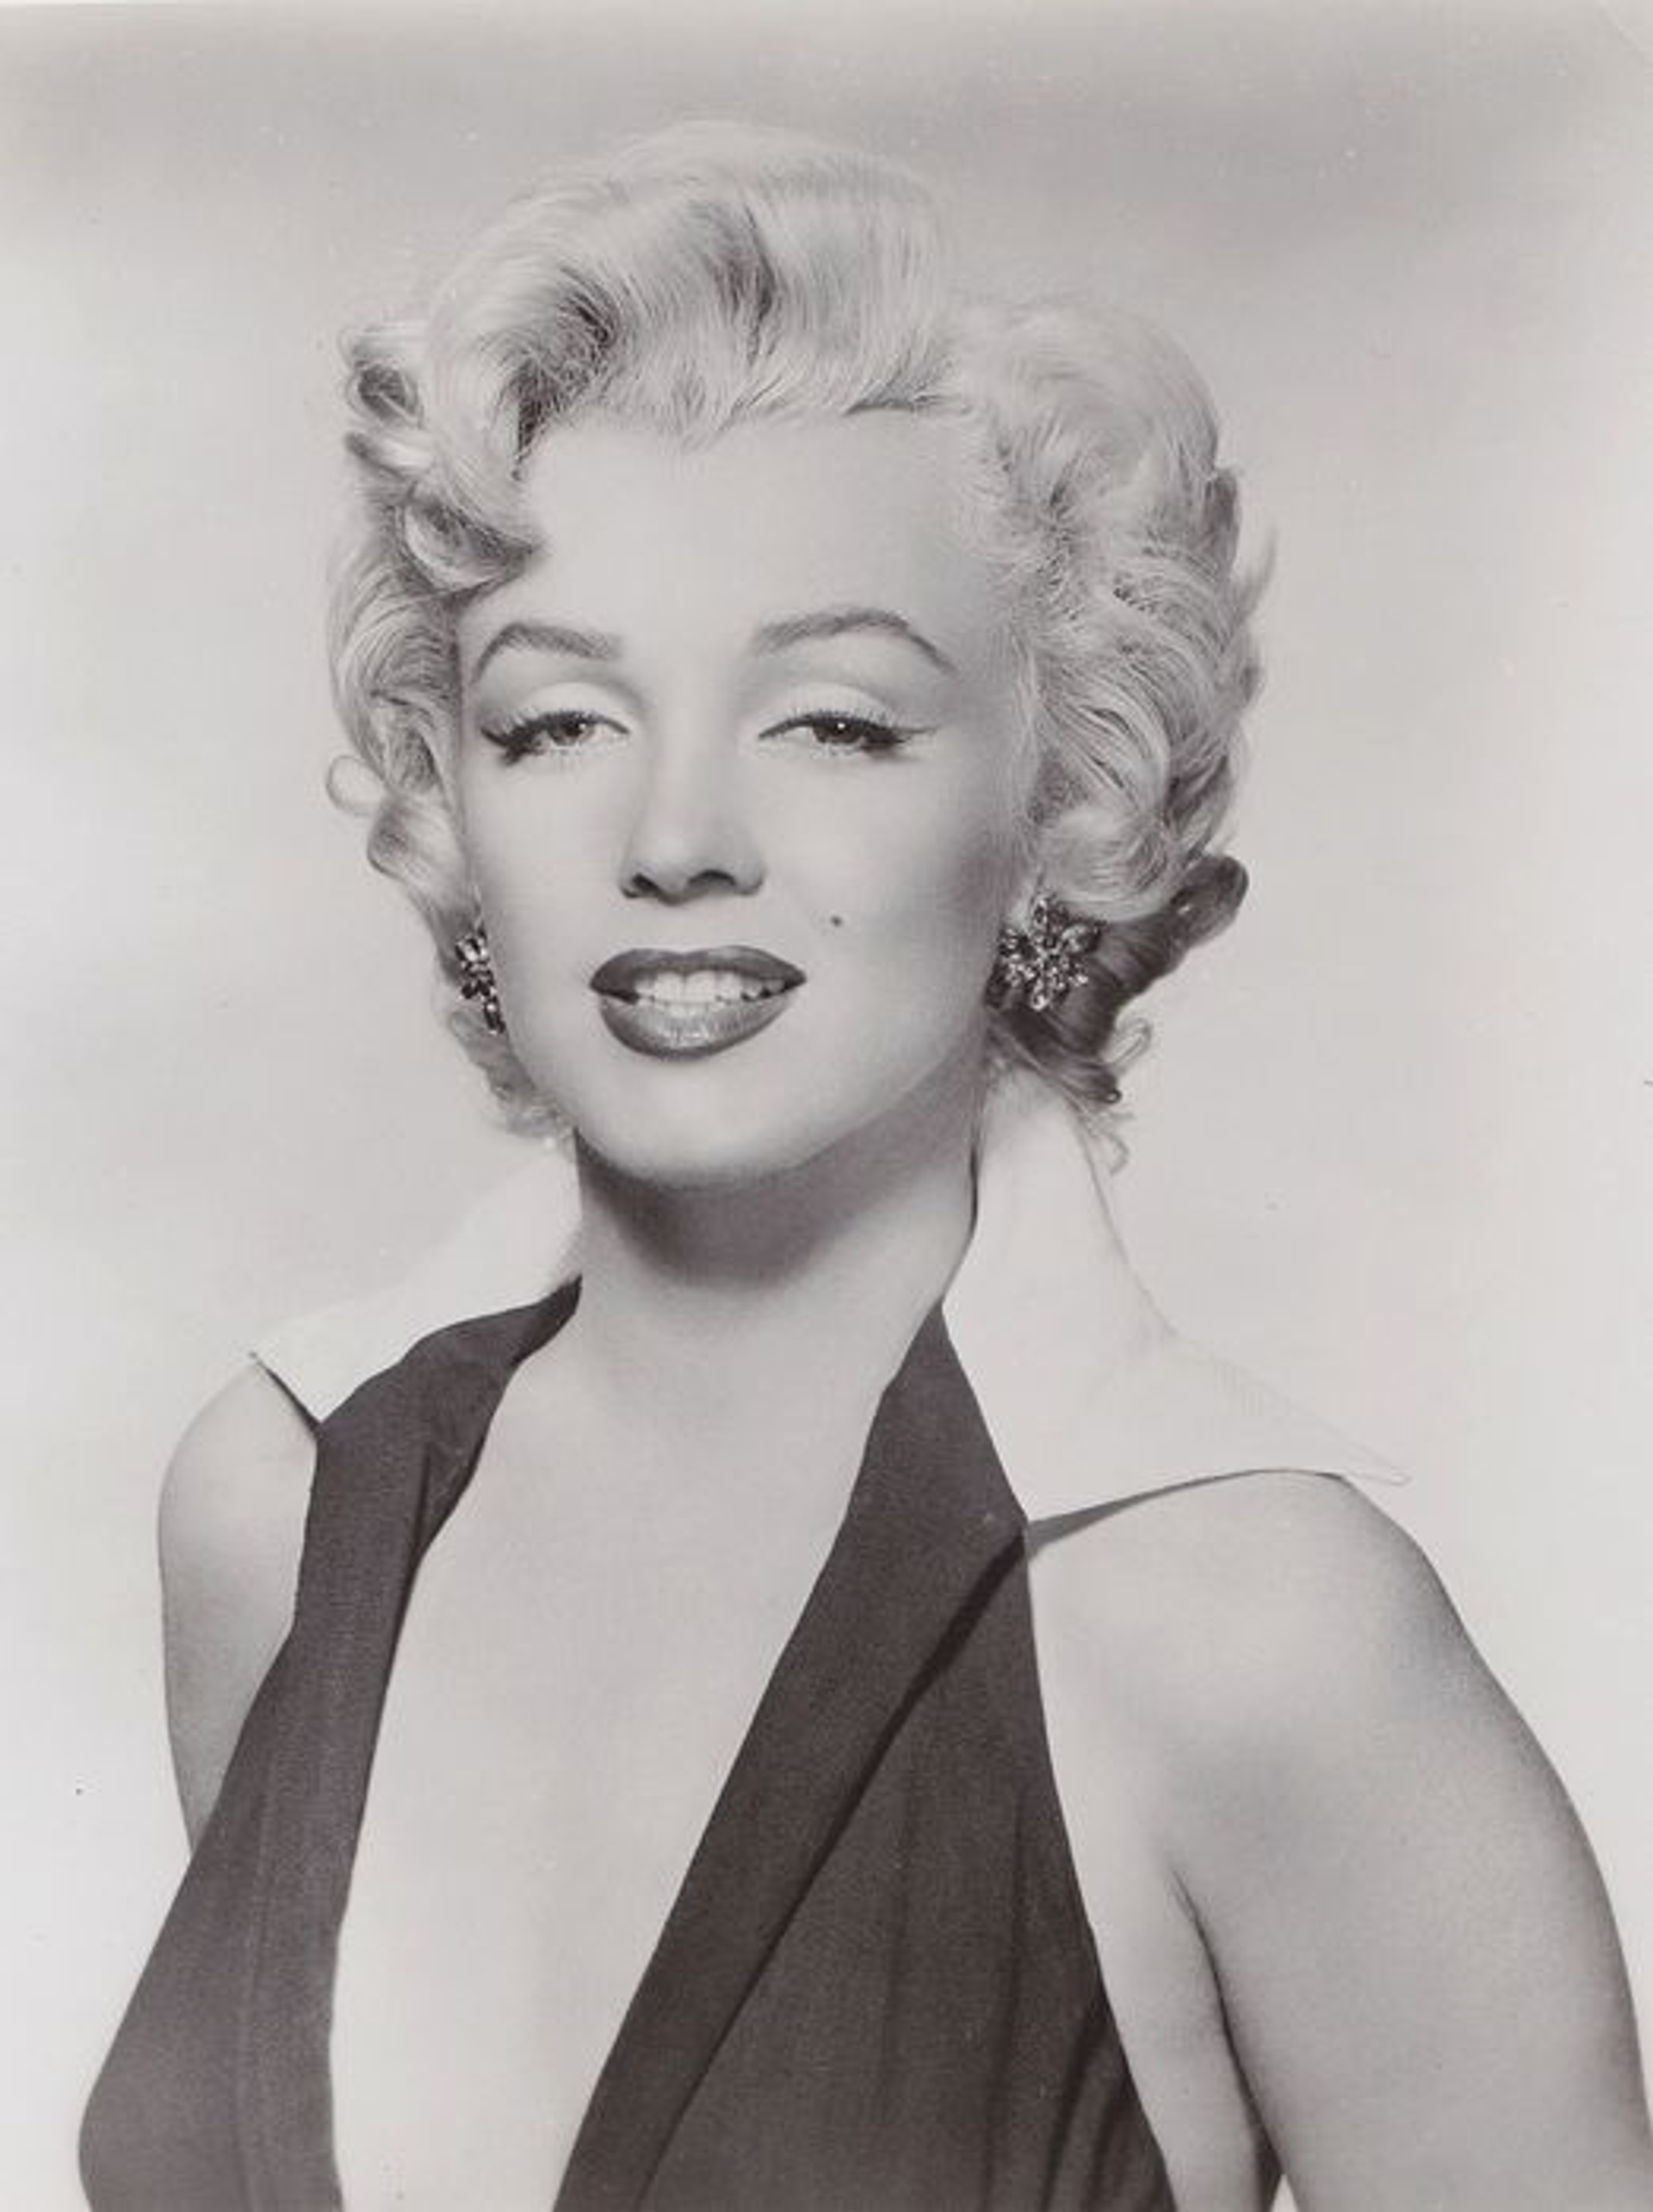 A monochrome publicity portrait of Marilyn Monroe as Rose Loomis in the 1953 film Niagara. She seductively looks into the camera, with half-closed eyes and slightly parted lips.